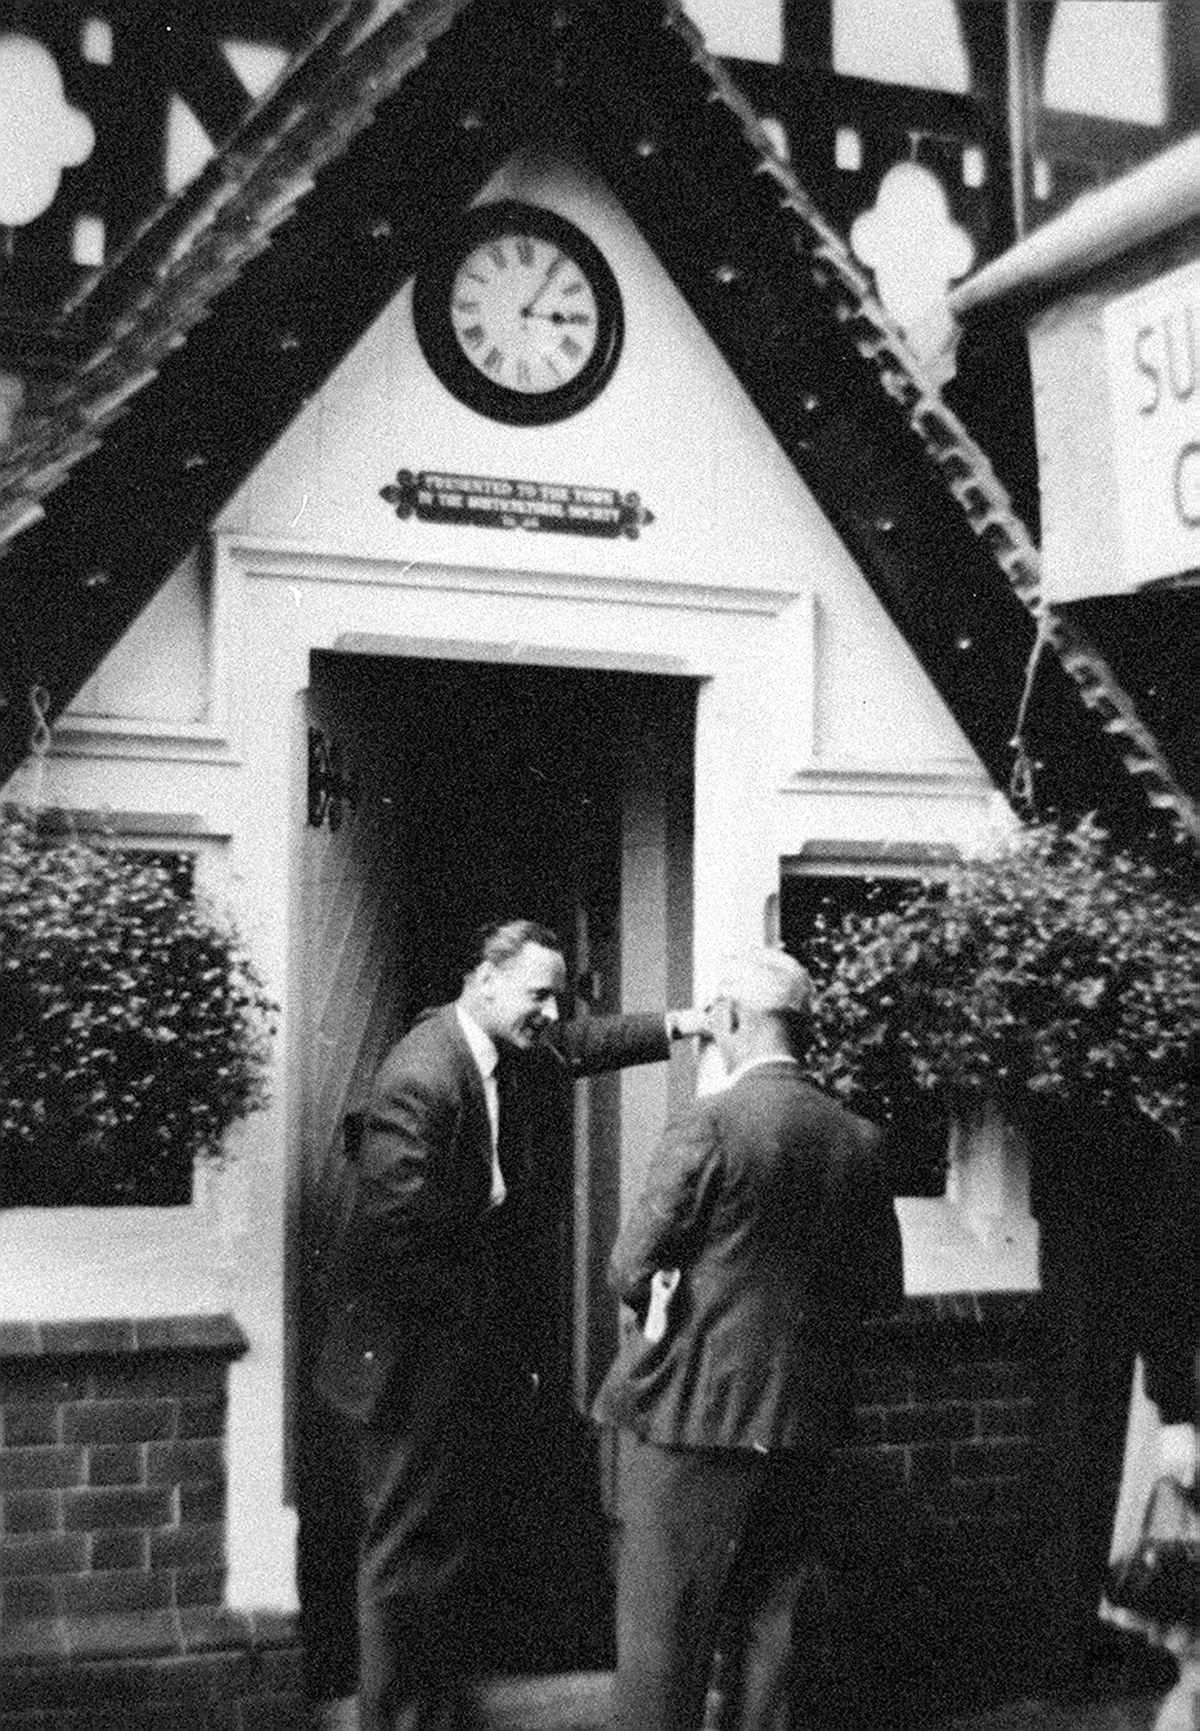 Chatting outside his home at Quarry Lodge in the 1950s.